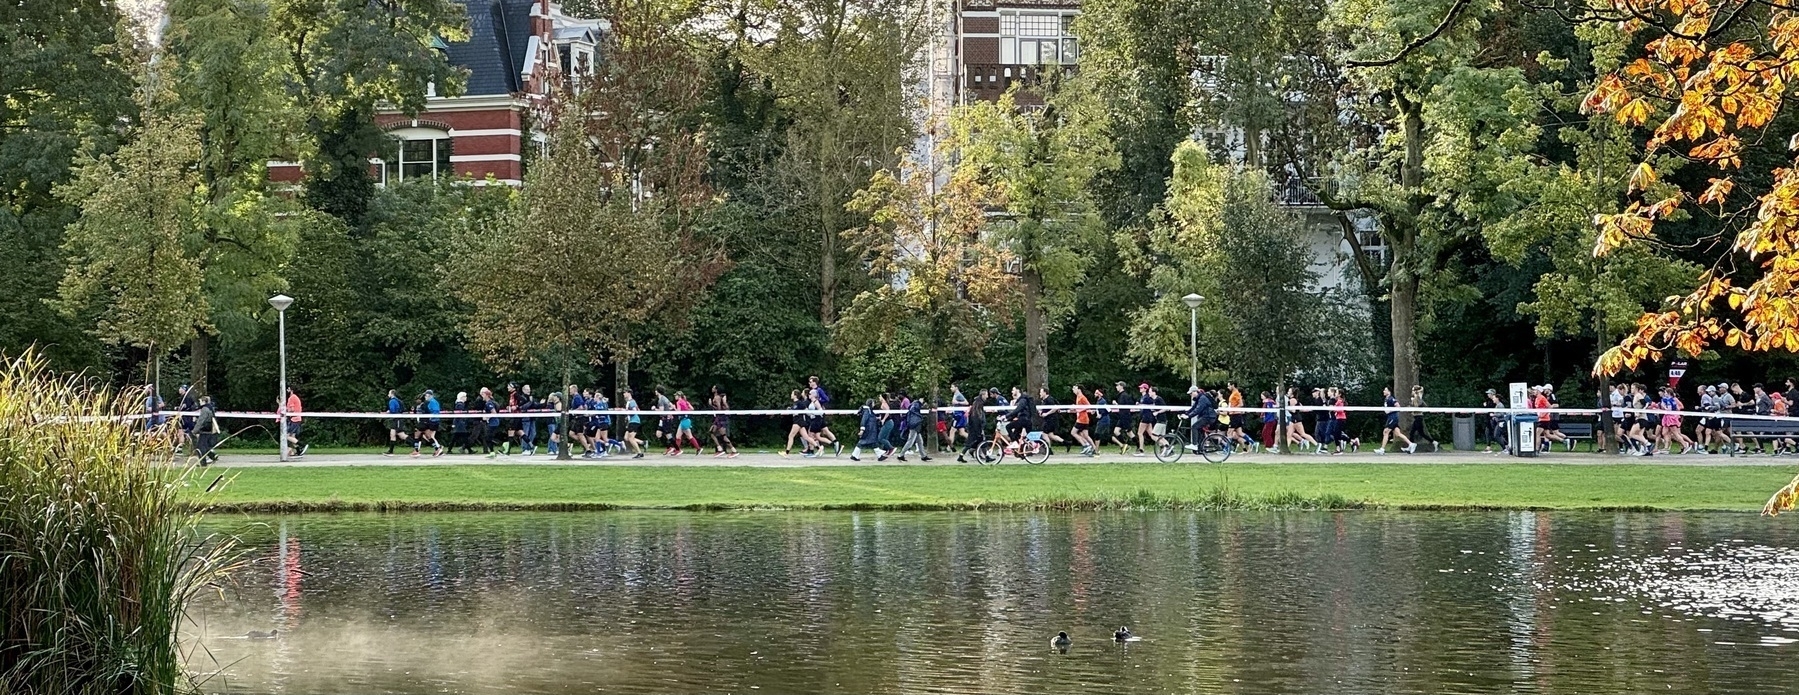 Runners from the Amsterdam Marathon passing a lake in Vondelpark.